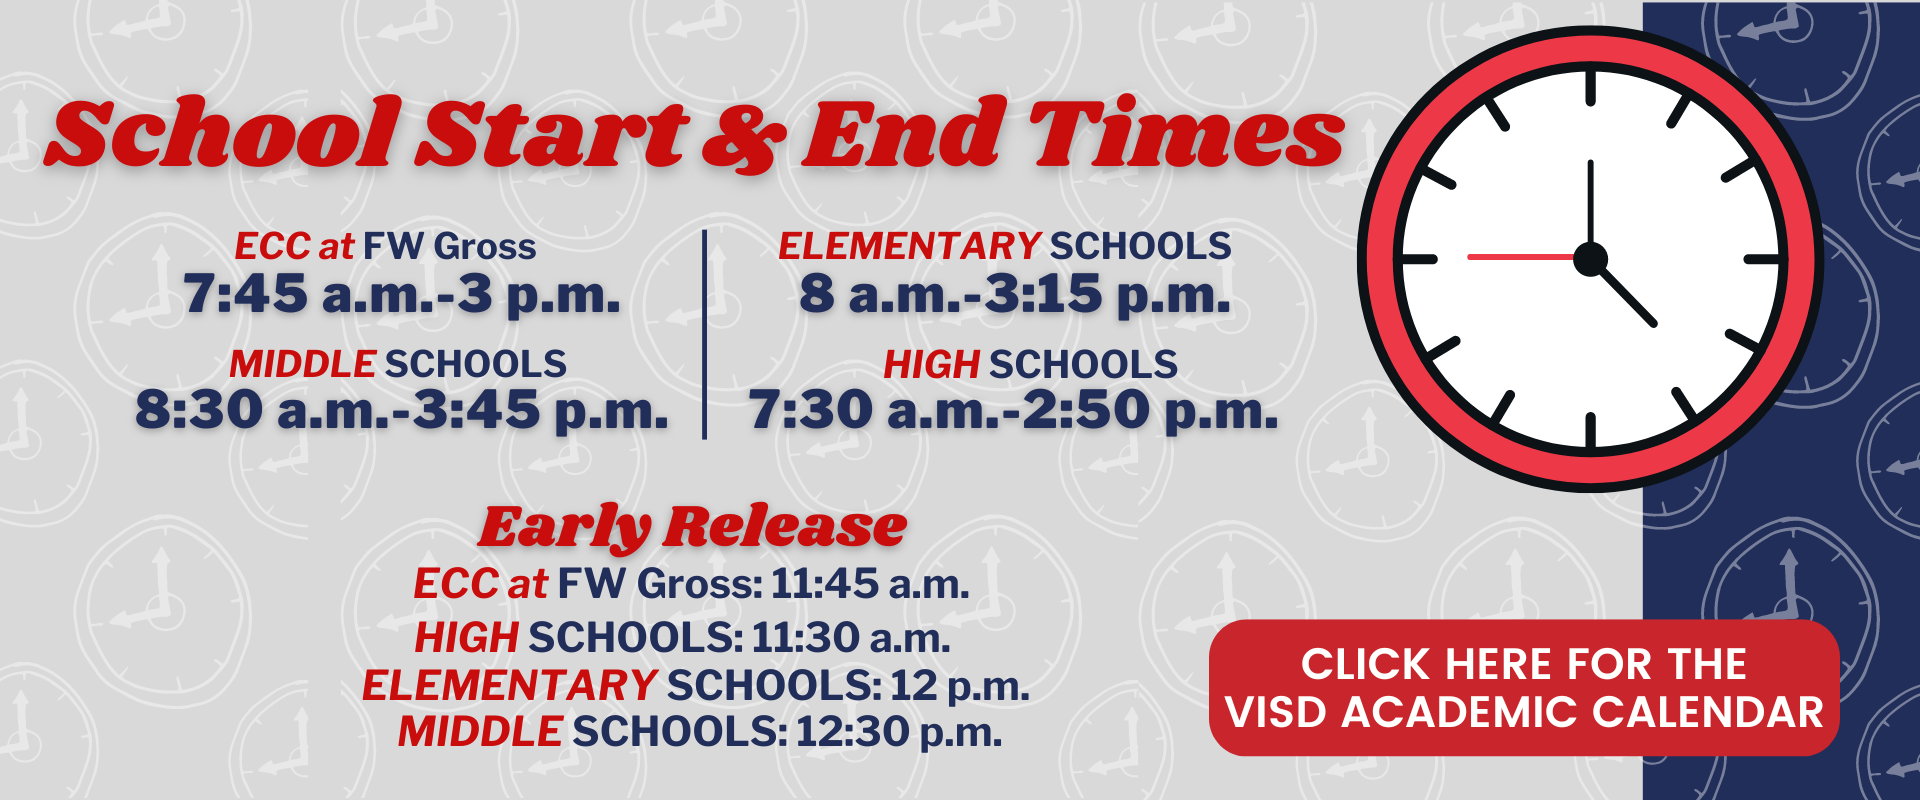 visd campus start and end times